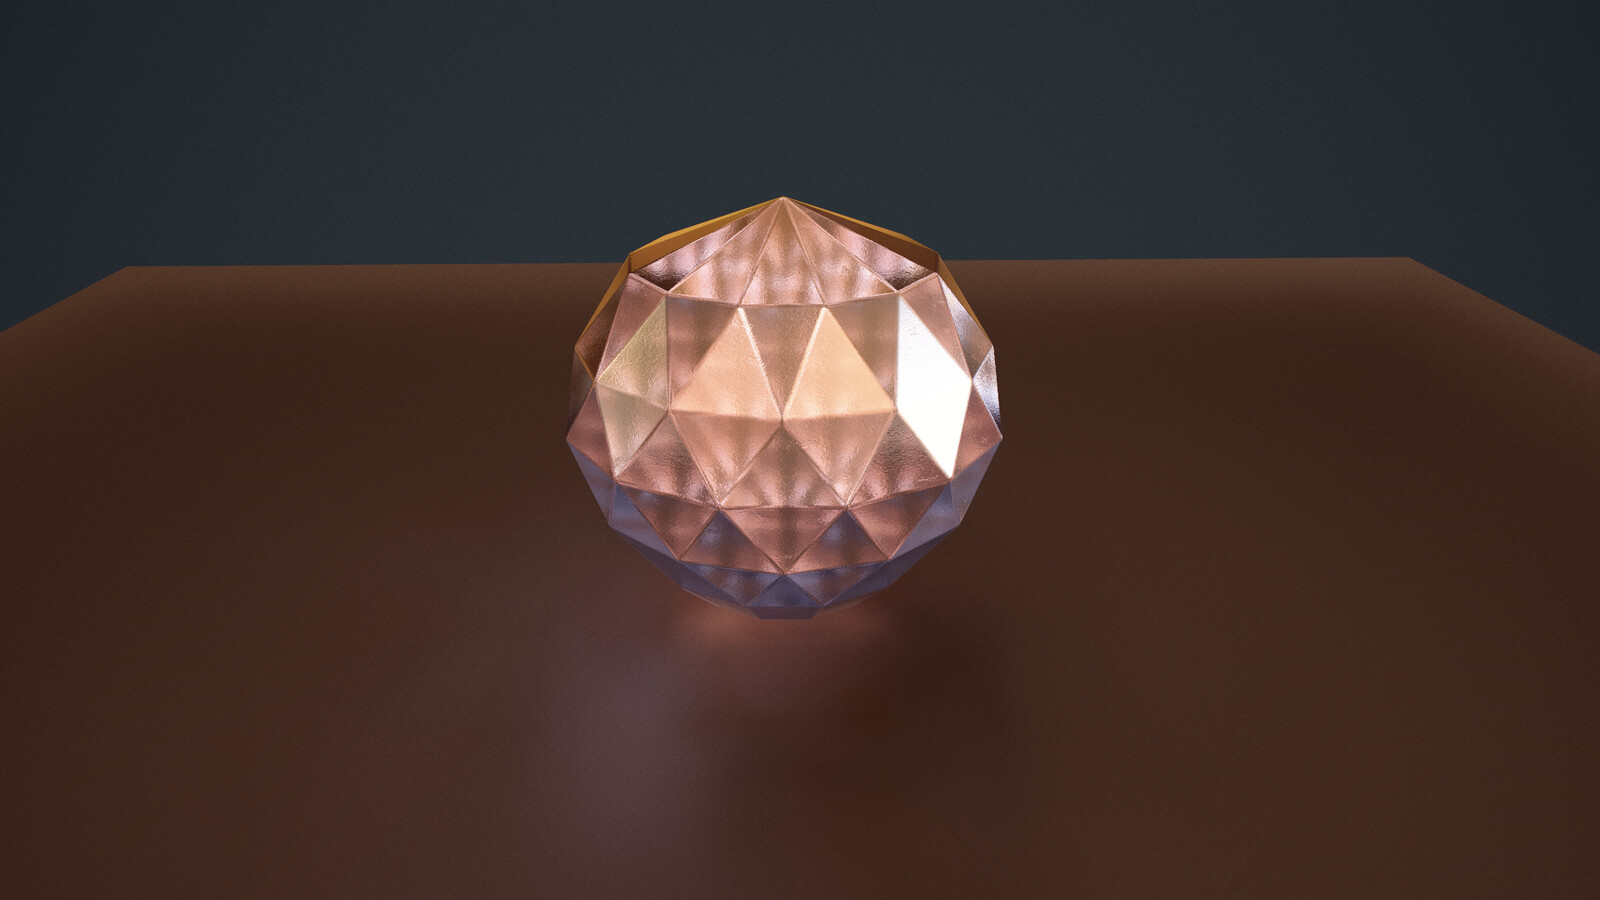 My first attempt with a glass shader using normals in Marmoset.